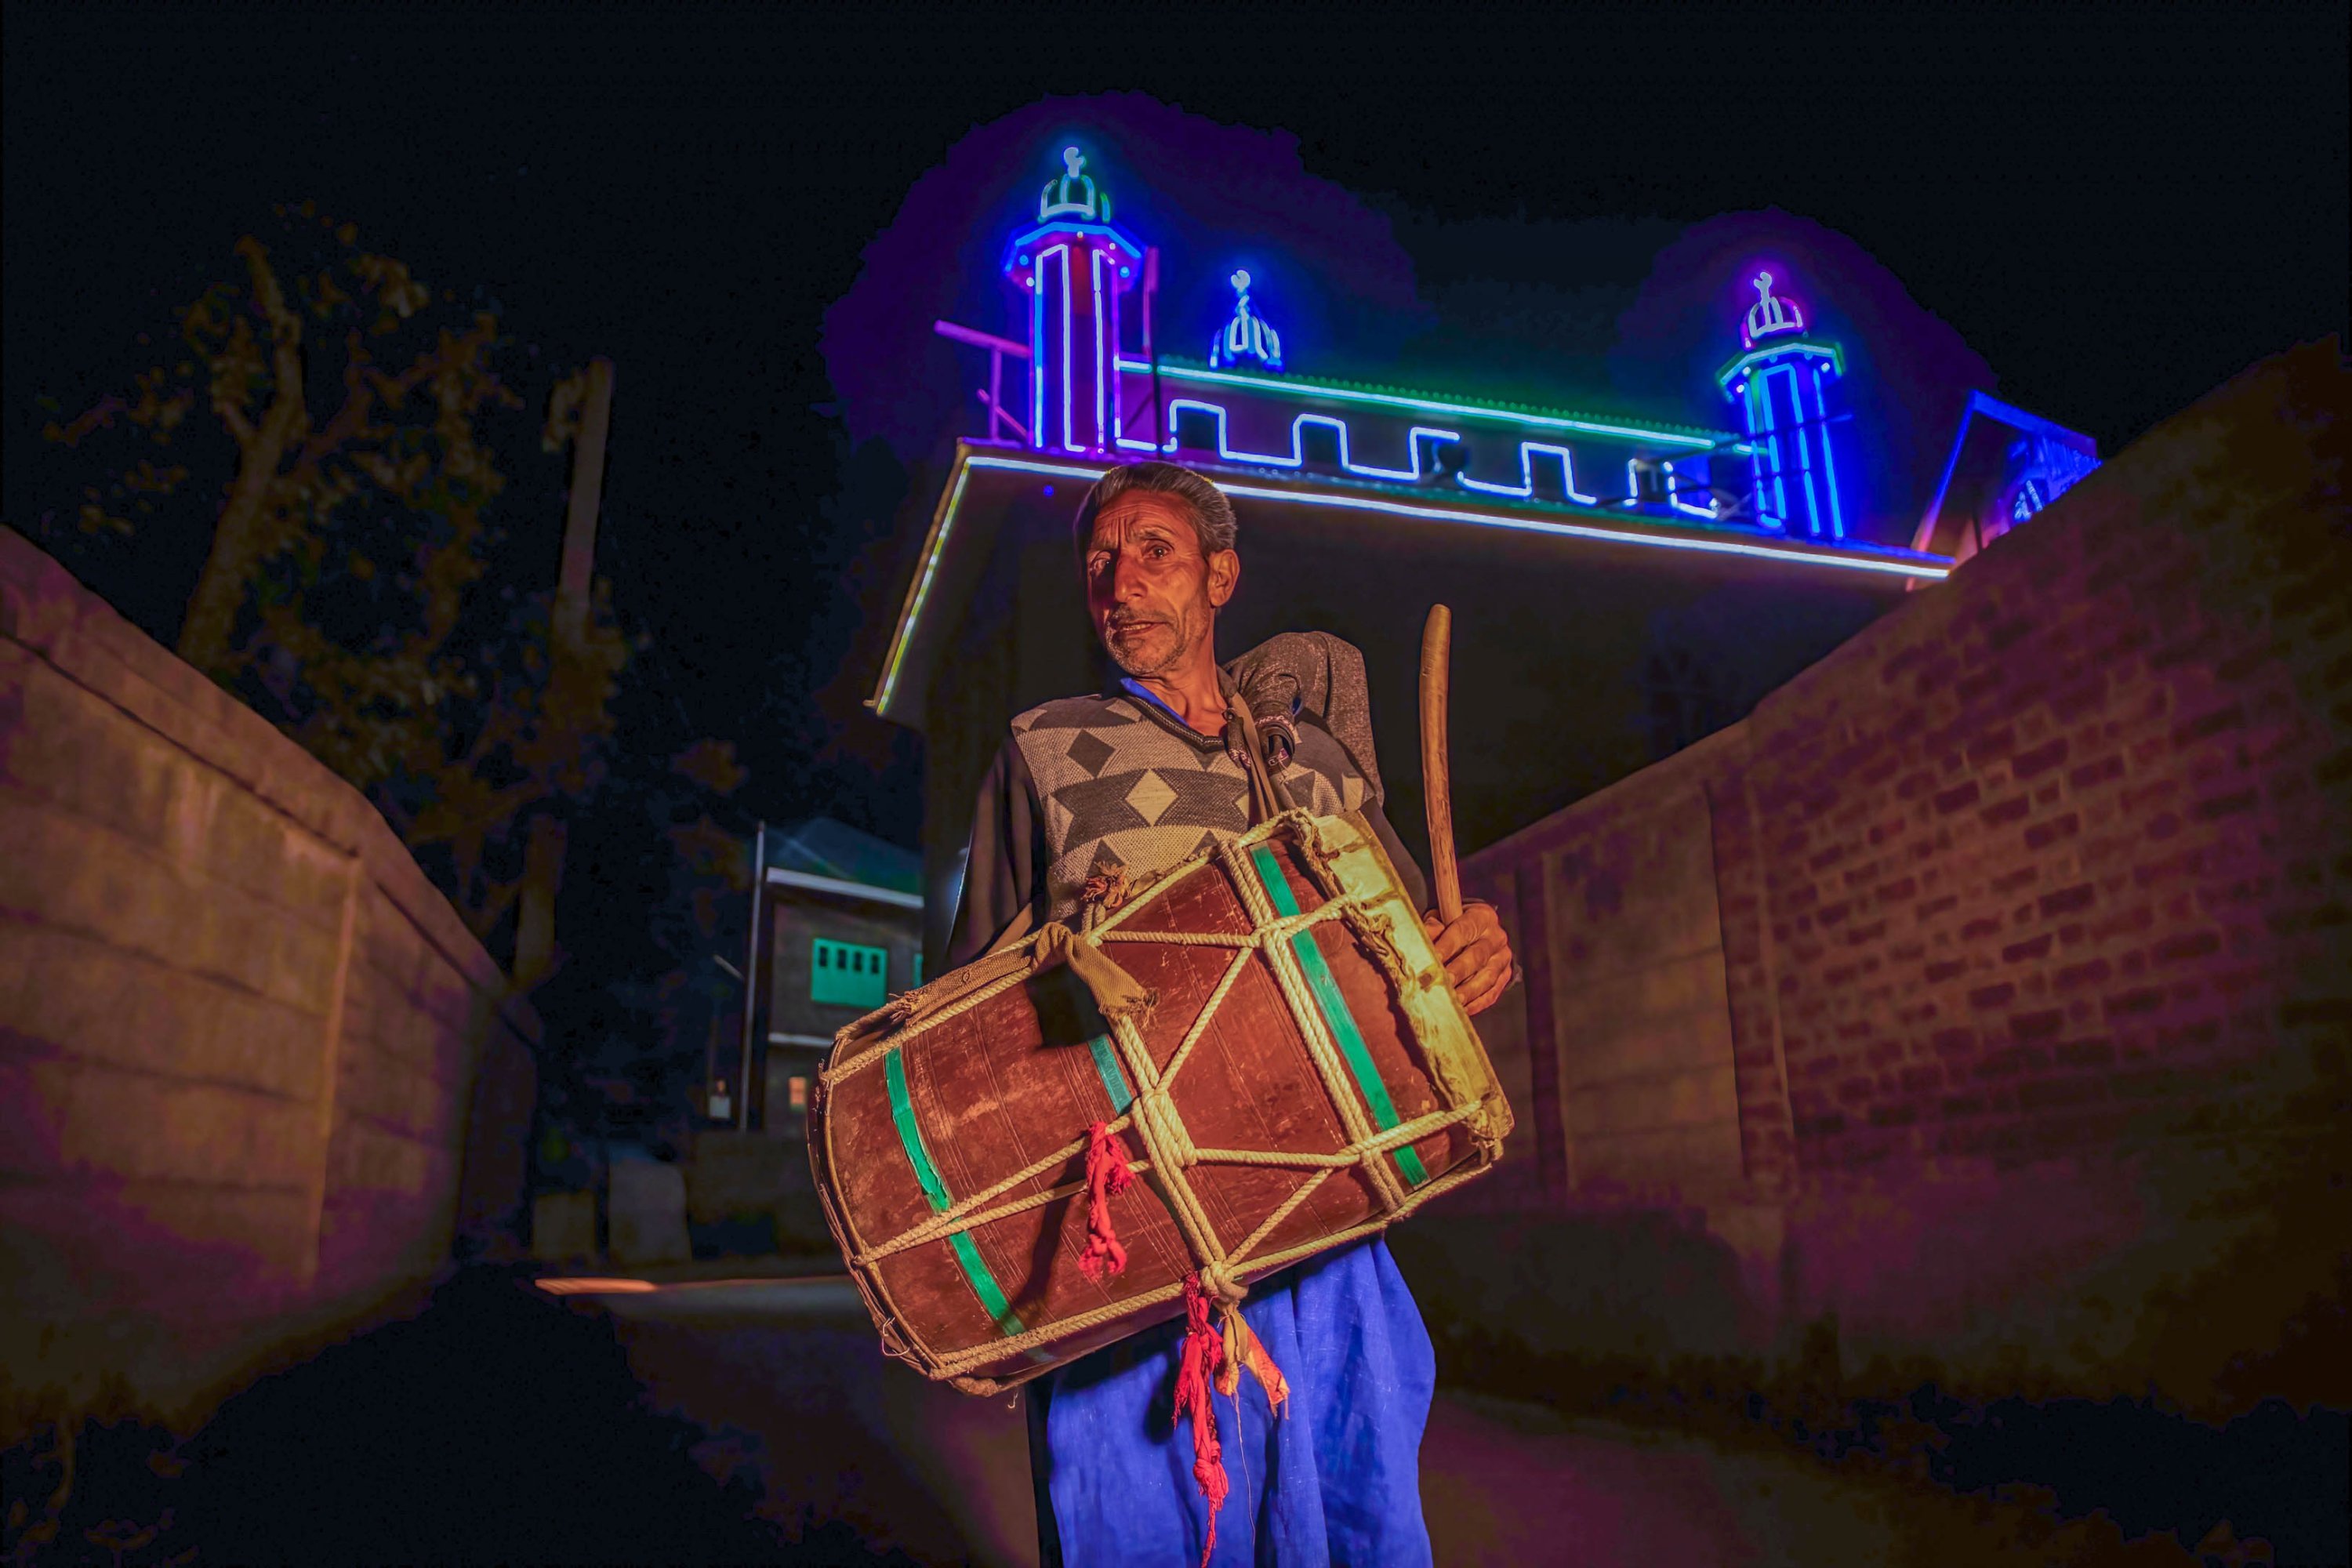 Ali Mohammad, 55, a Kashmiri Ramadan drummer or human alarm, bangs his drum as he walks through the dark alleys in the outskirts of Srinagar, Kashmir on Apr. 10, 2022, alerting Muslim residents to wake up for pre-dawn meals before the start of the following day’s fast during the holy month of Ramadan. (REUTERS)